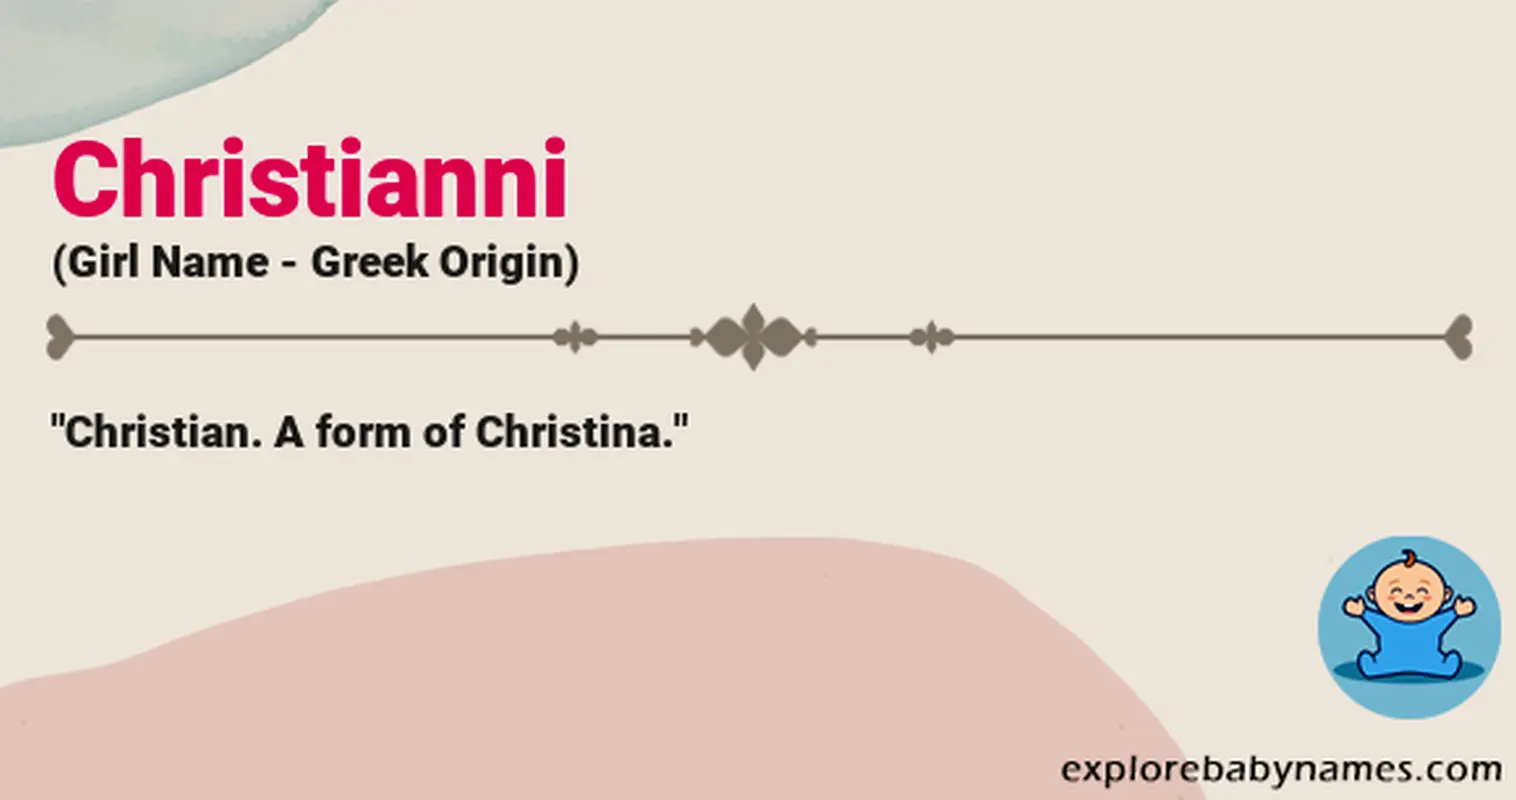 Meaning of Christianni